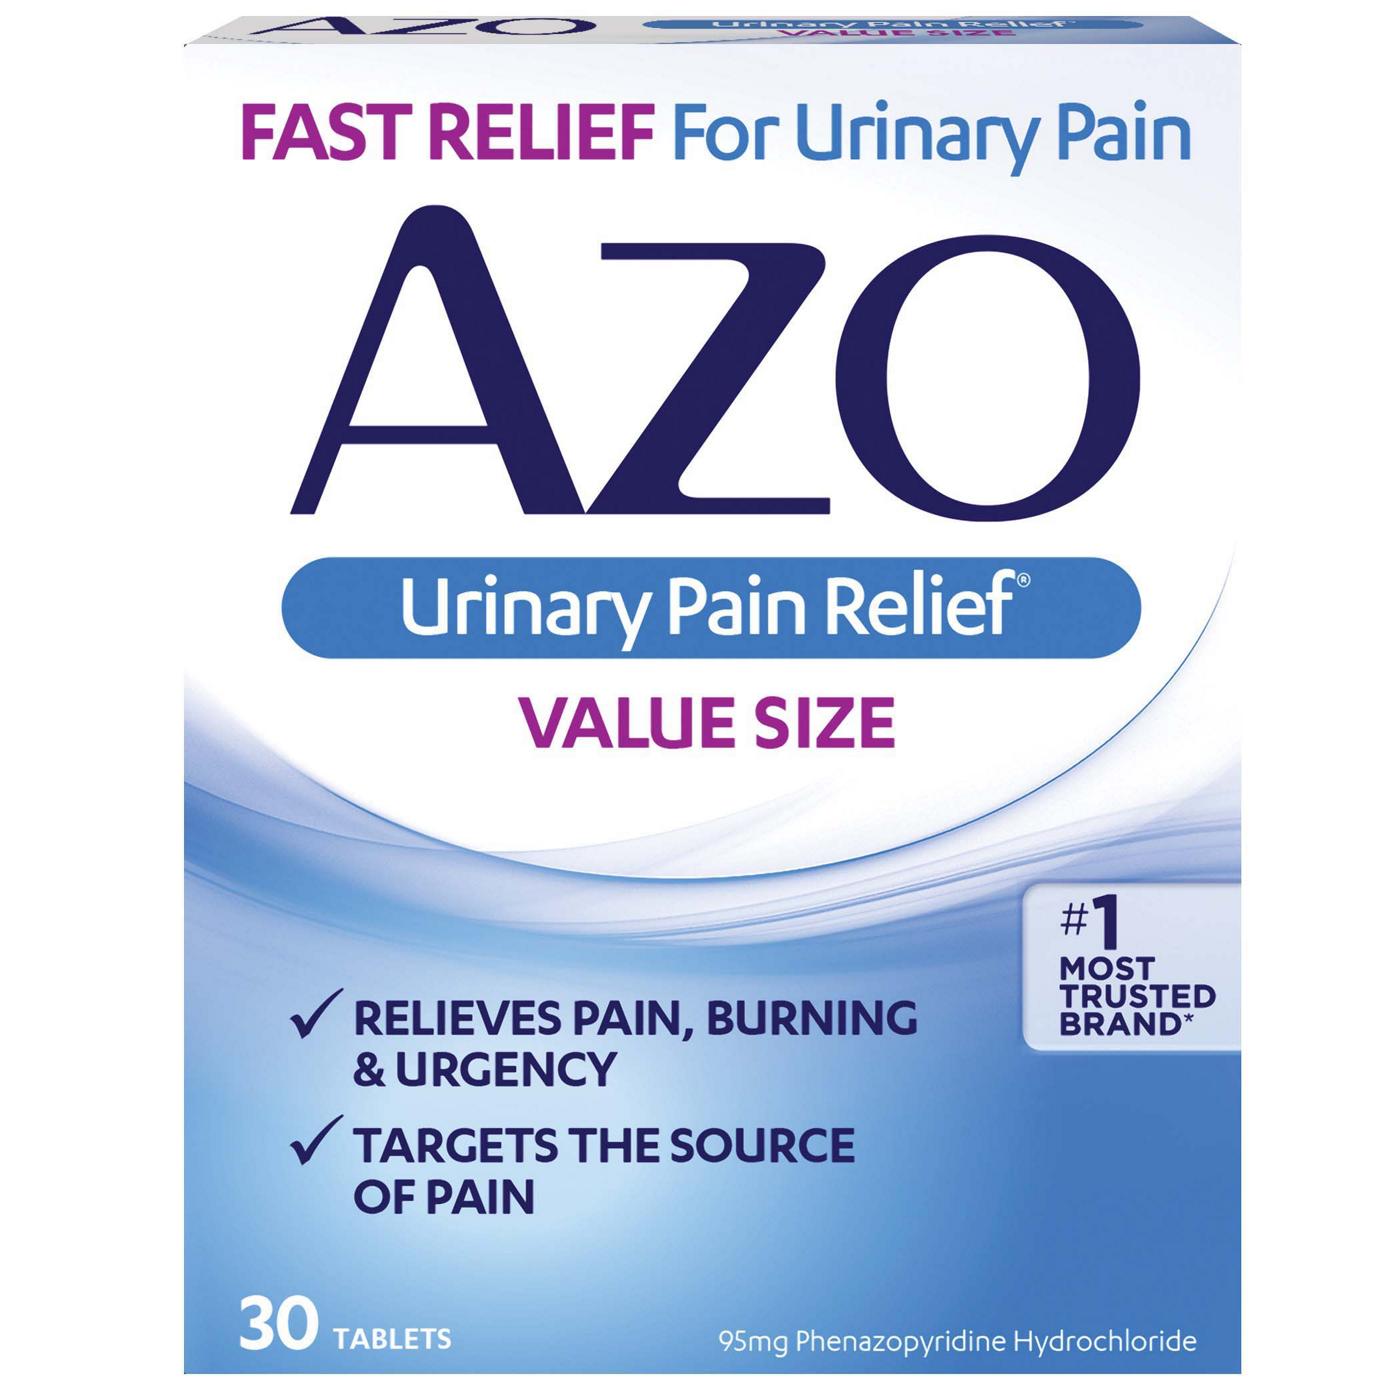 Azo Urinary Pain Relief; image 1 of 4